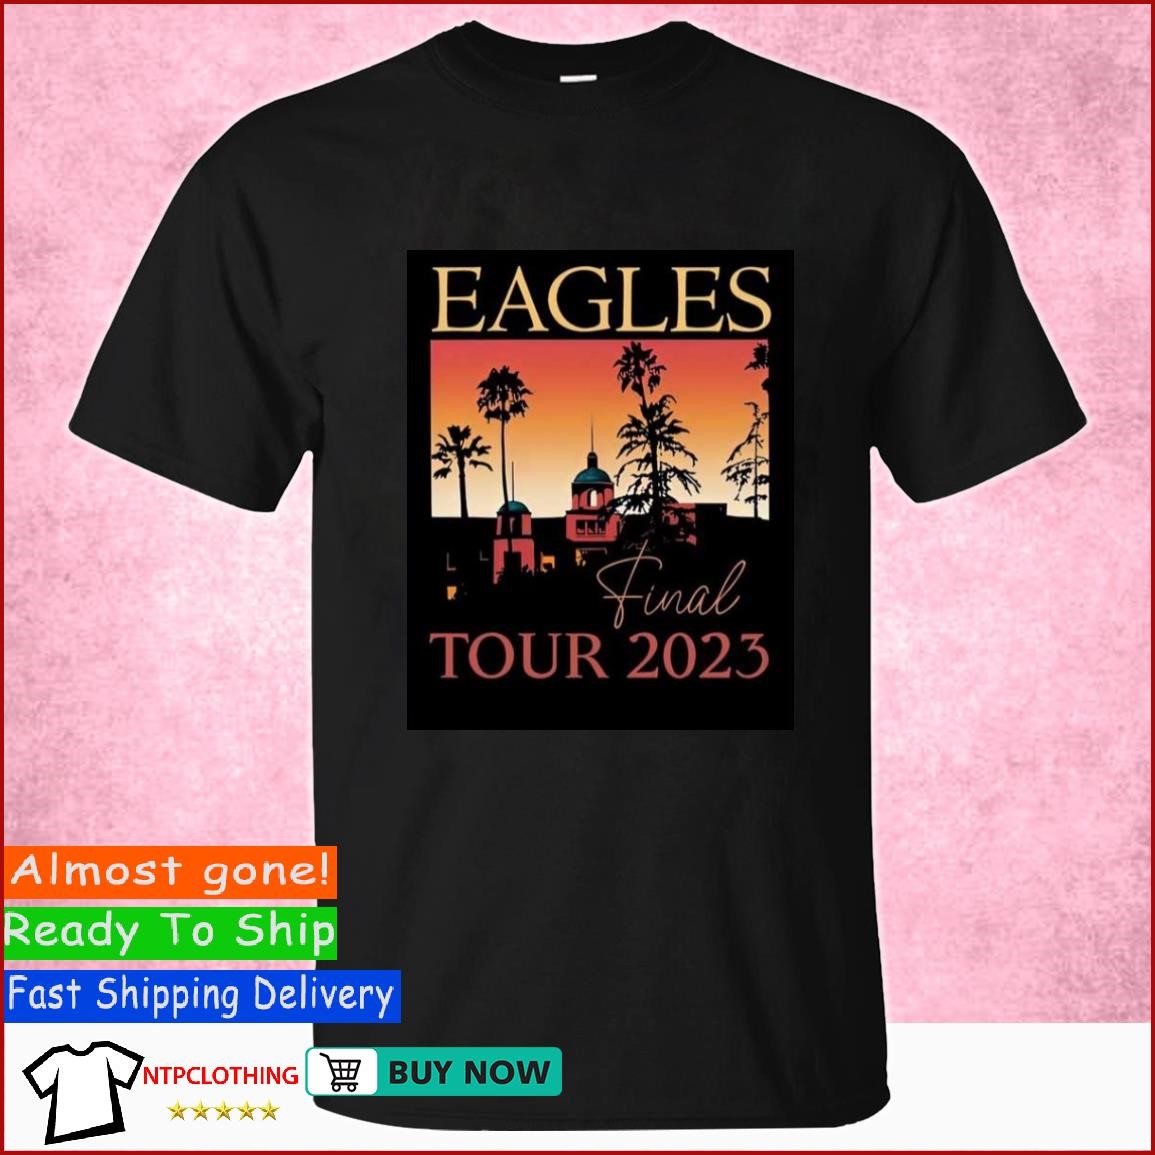 Vintage Eagles T-Shirt Selected by Goodbye Heart